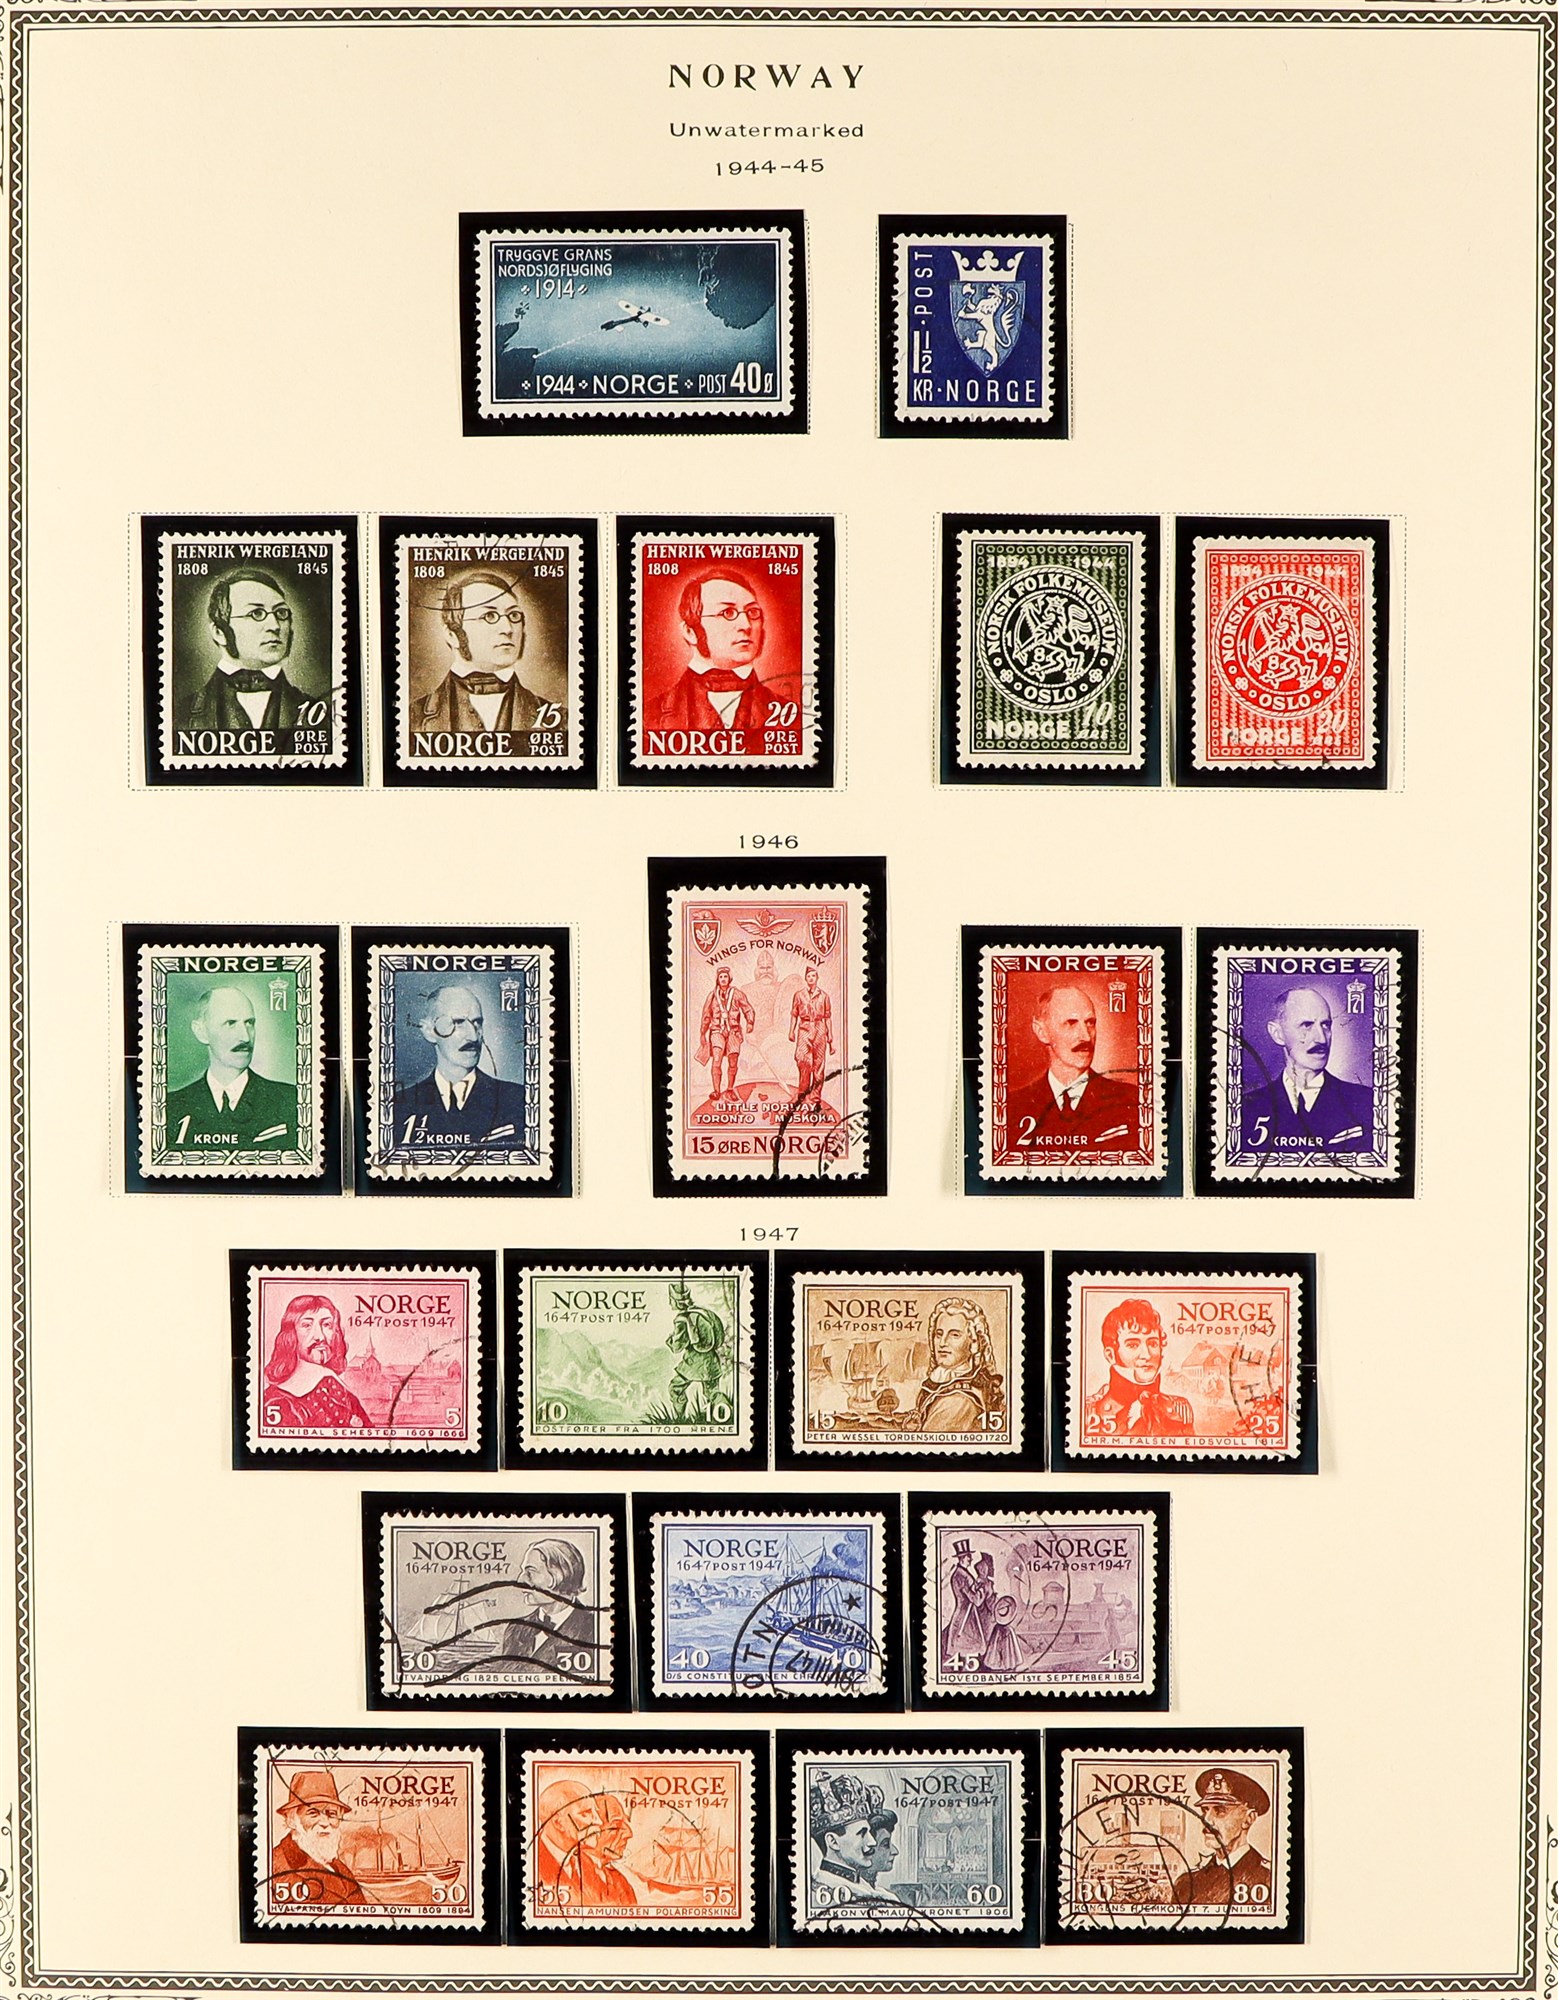 NORWAY 1855 - 1988 COLLECTION of stamps in Scott Specialty album (pages to 2002) of mint / never - Image 9 of 16